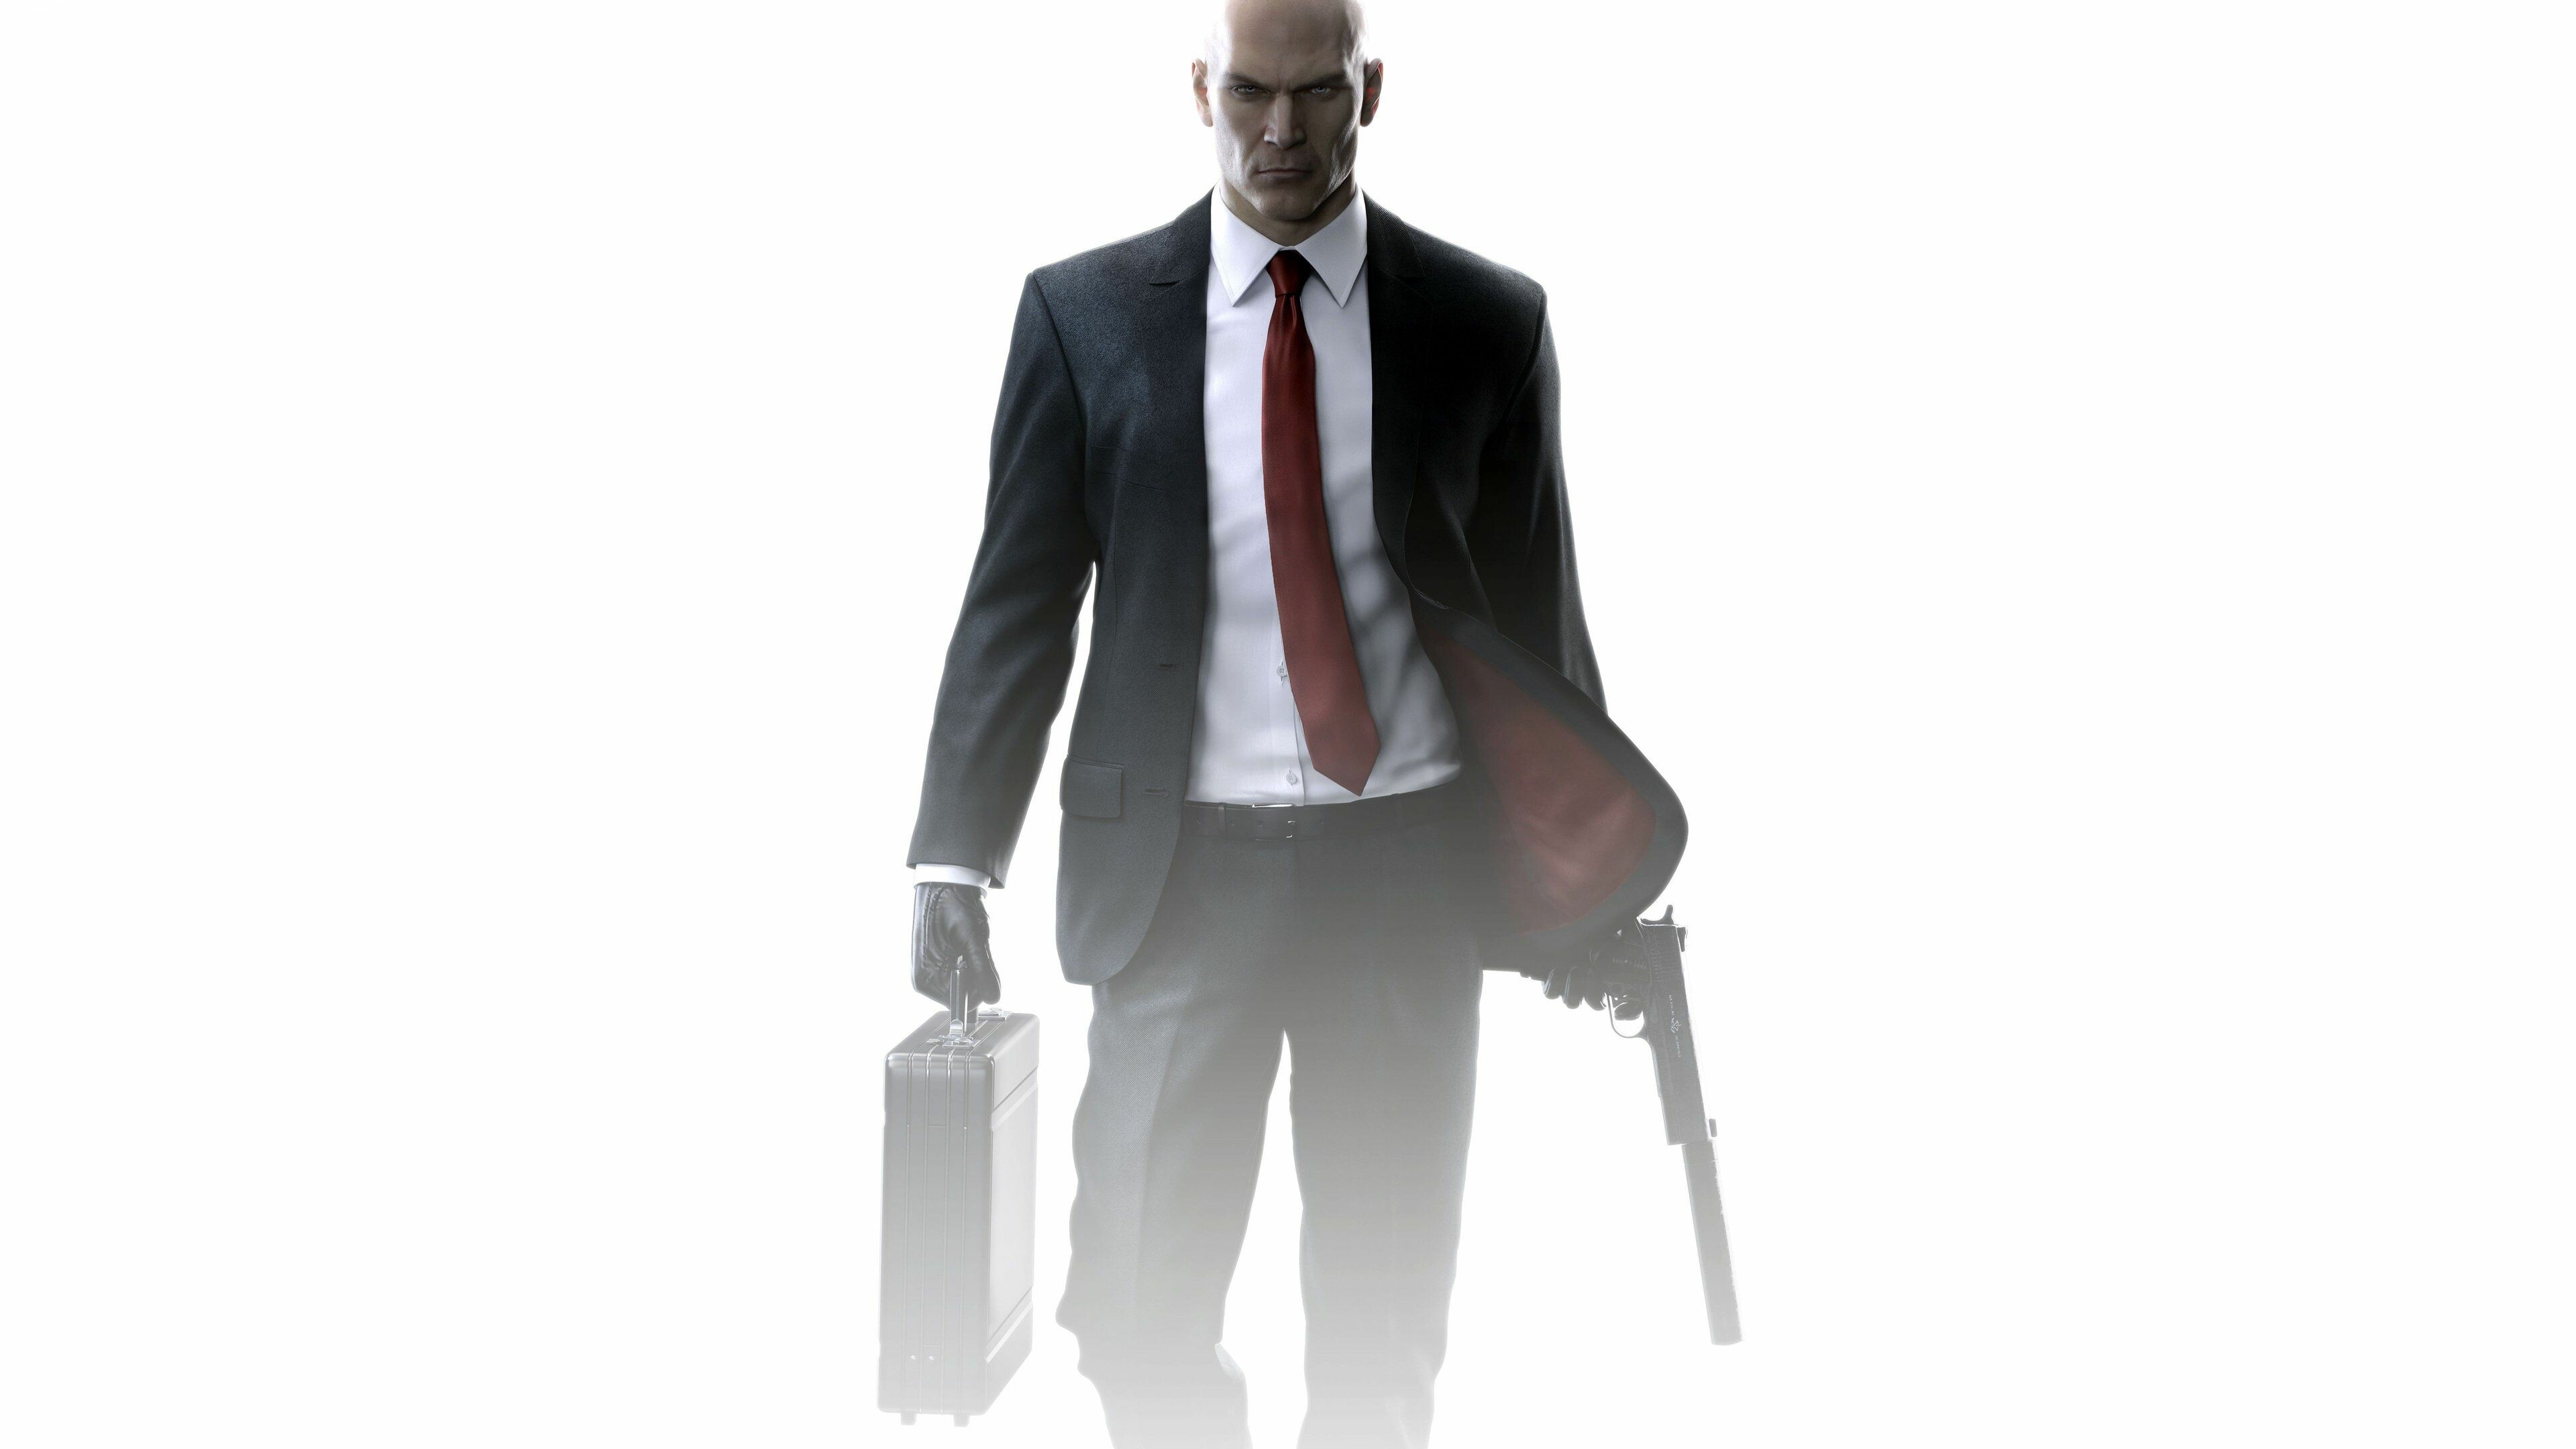 Hitman game, Action-packed gameplay, Stealth missions, Assassination contracts, 3840x2160 4K Desktop